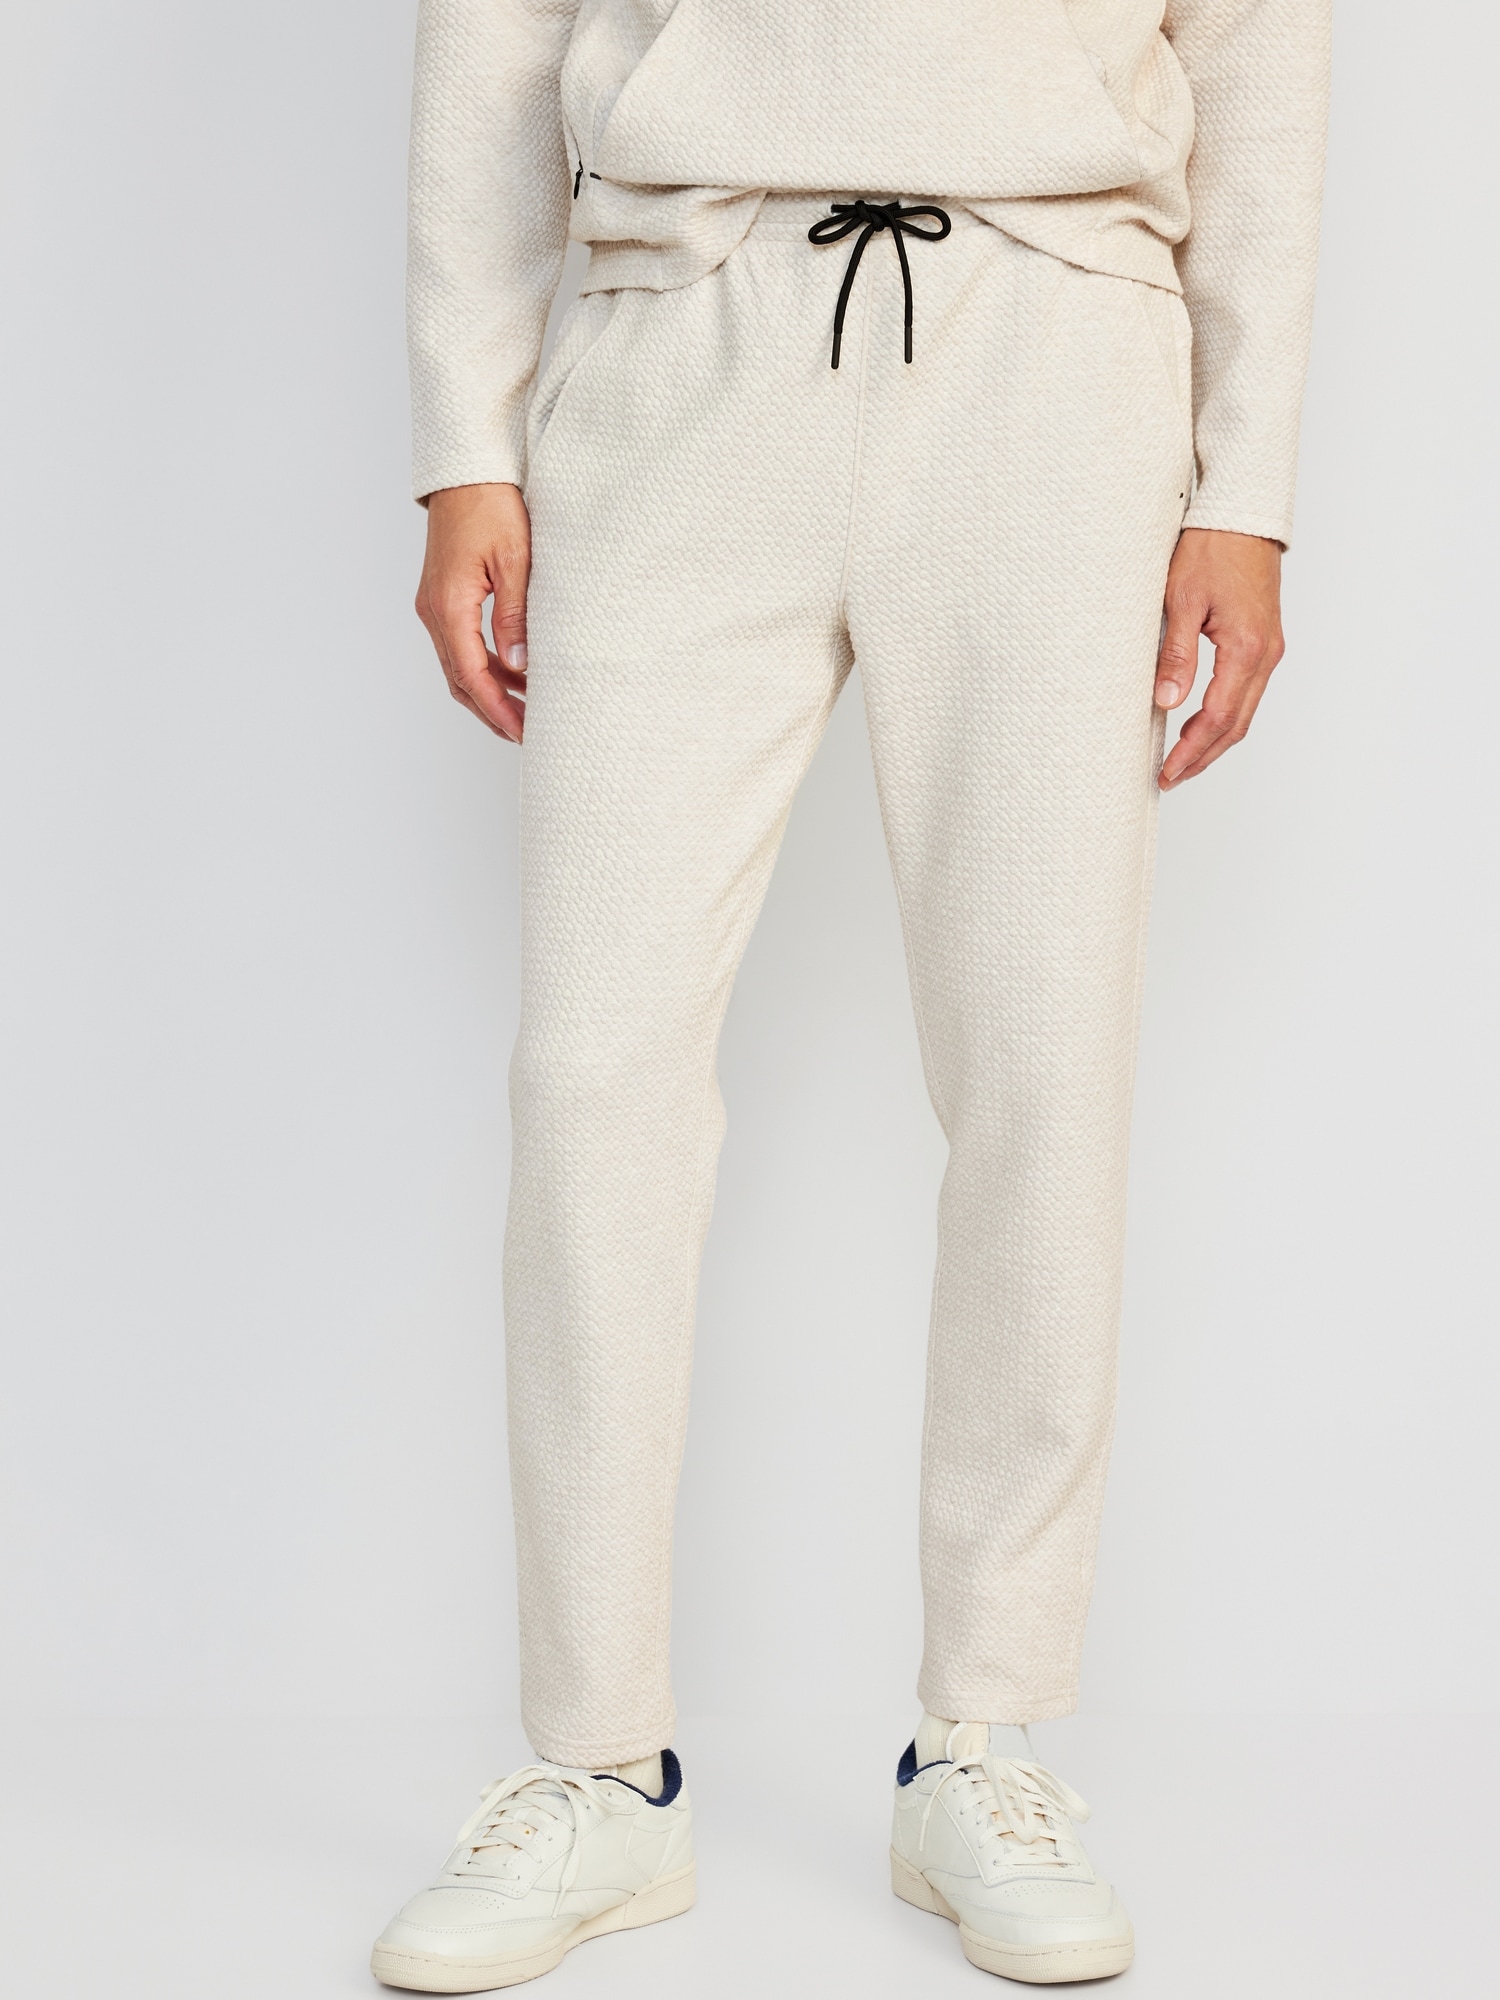 Textured Dynamic Fleece Tapered Sweatpants | Old Navy